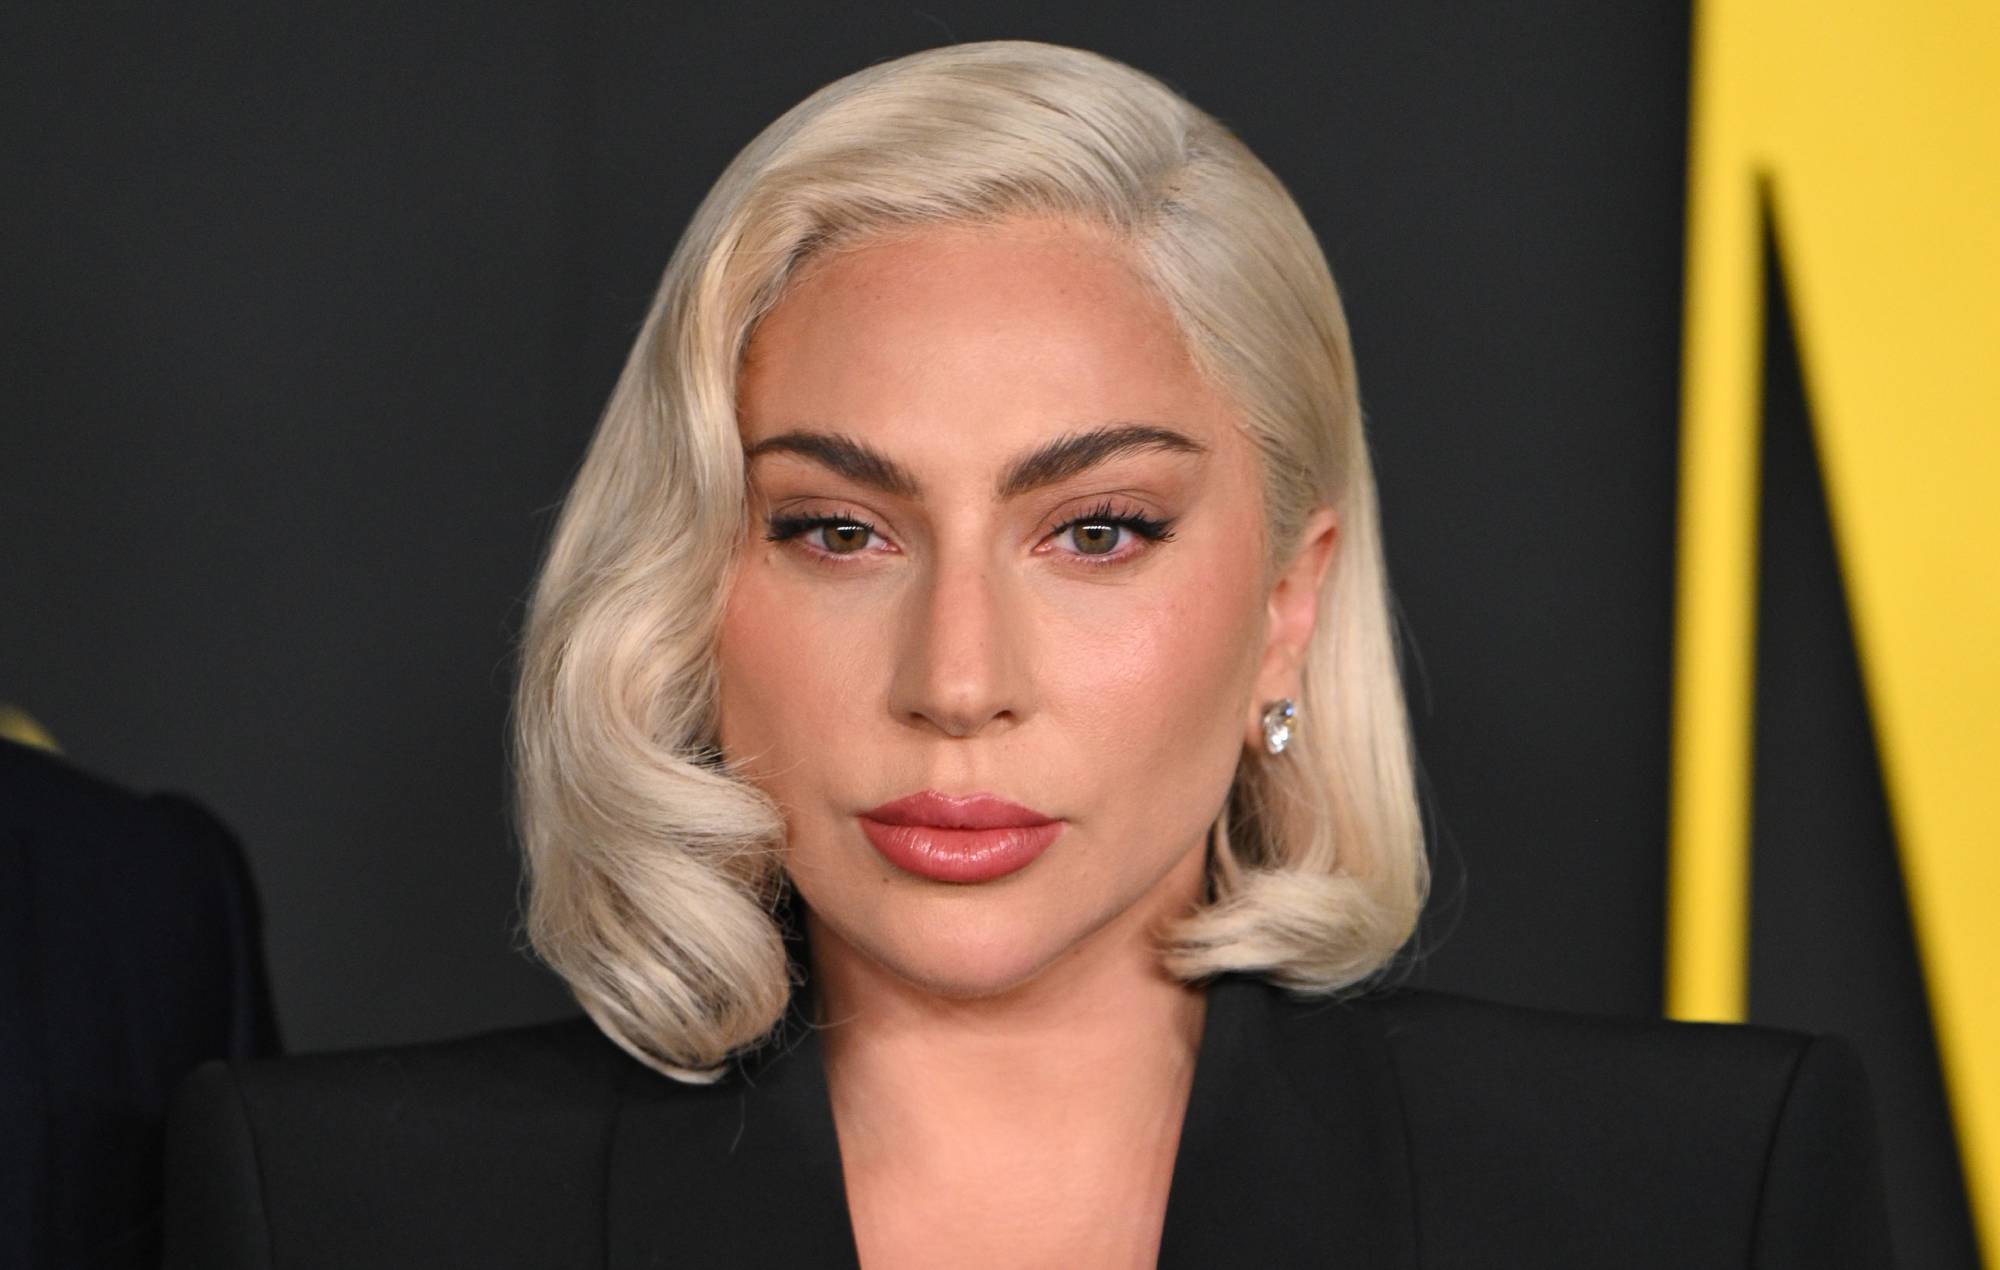 Lady Gaga shares uplifting birthday post, says “I am writing some of my best music in as long as I can remember”